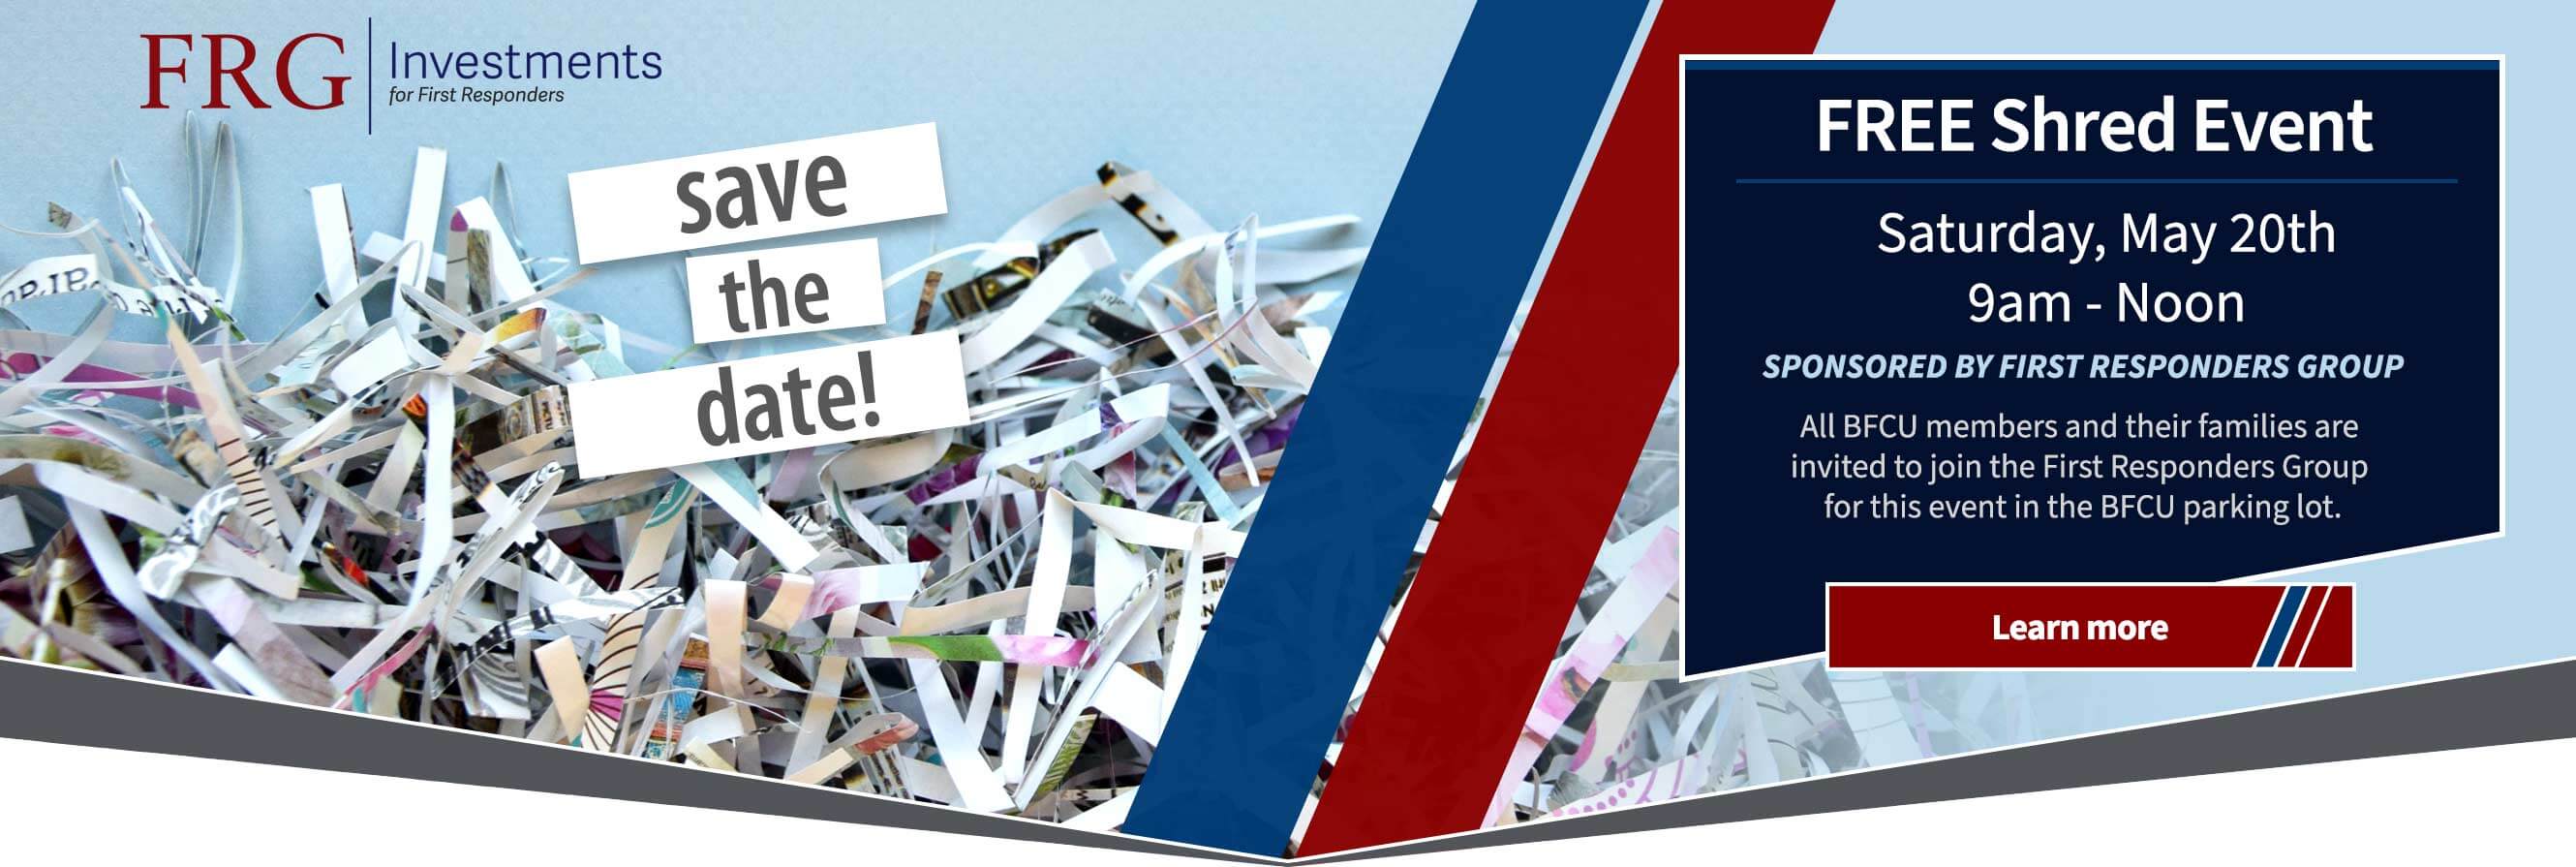 FREE Shred Event. Saturday, May 20th 9am - Noon.  SPONSORED BY FIRST RESPONDERS GROUP All BFCU members and their families are invited to join the First Responders Group for this event in the BFCU parking lot. Learn More.